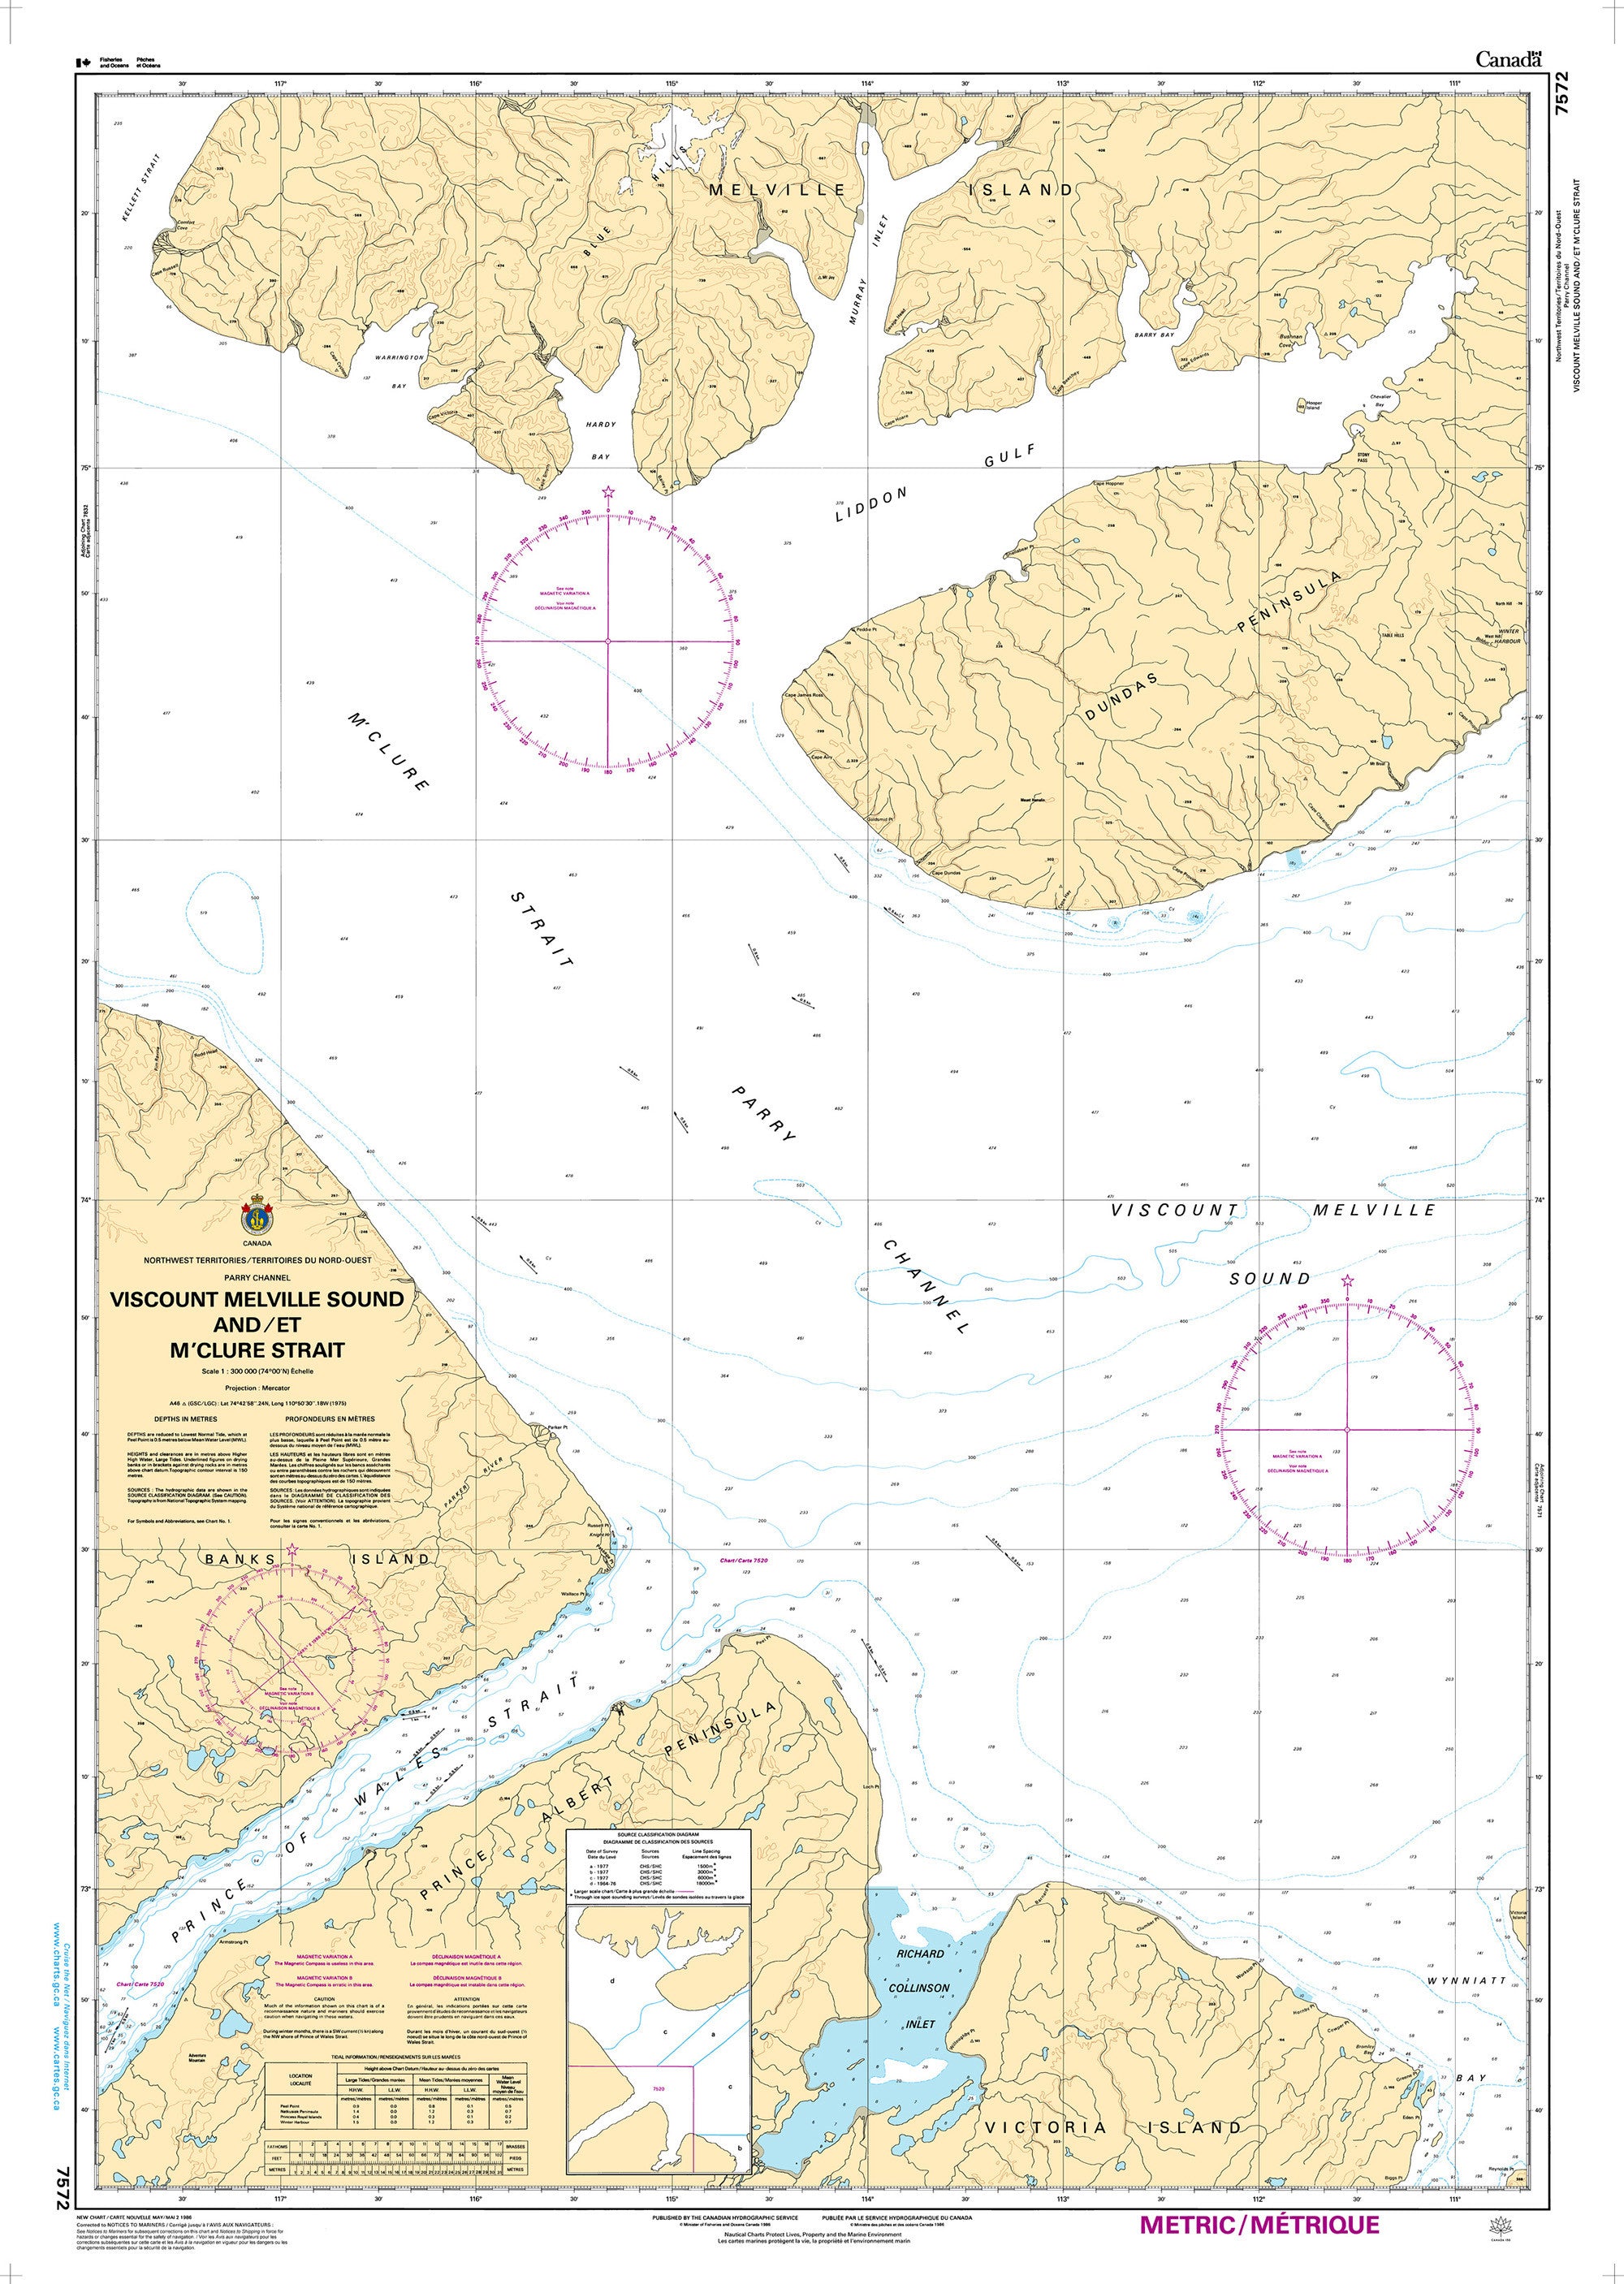 Canadian Hydrographic Service Nautical Chart CHS7572: Viscount Melville Sound and/et M'clure Strait